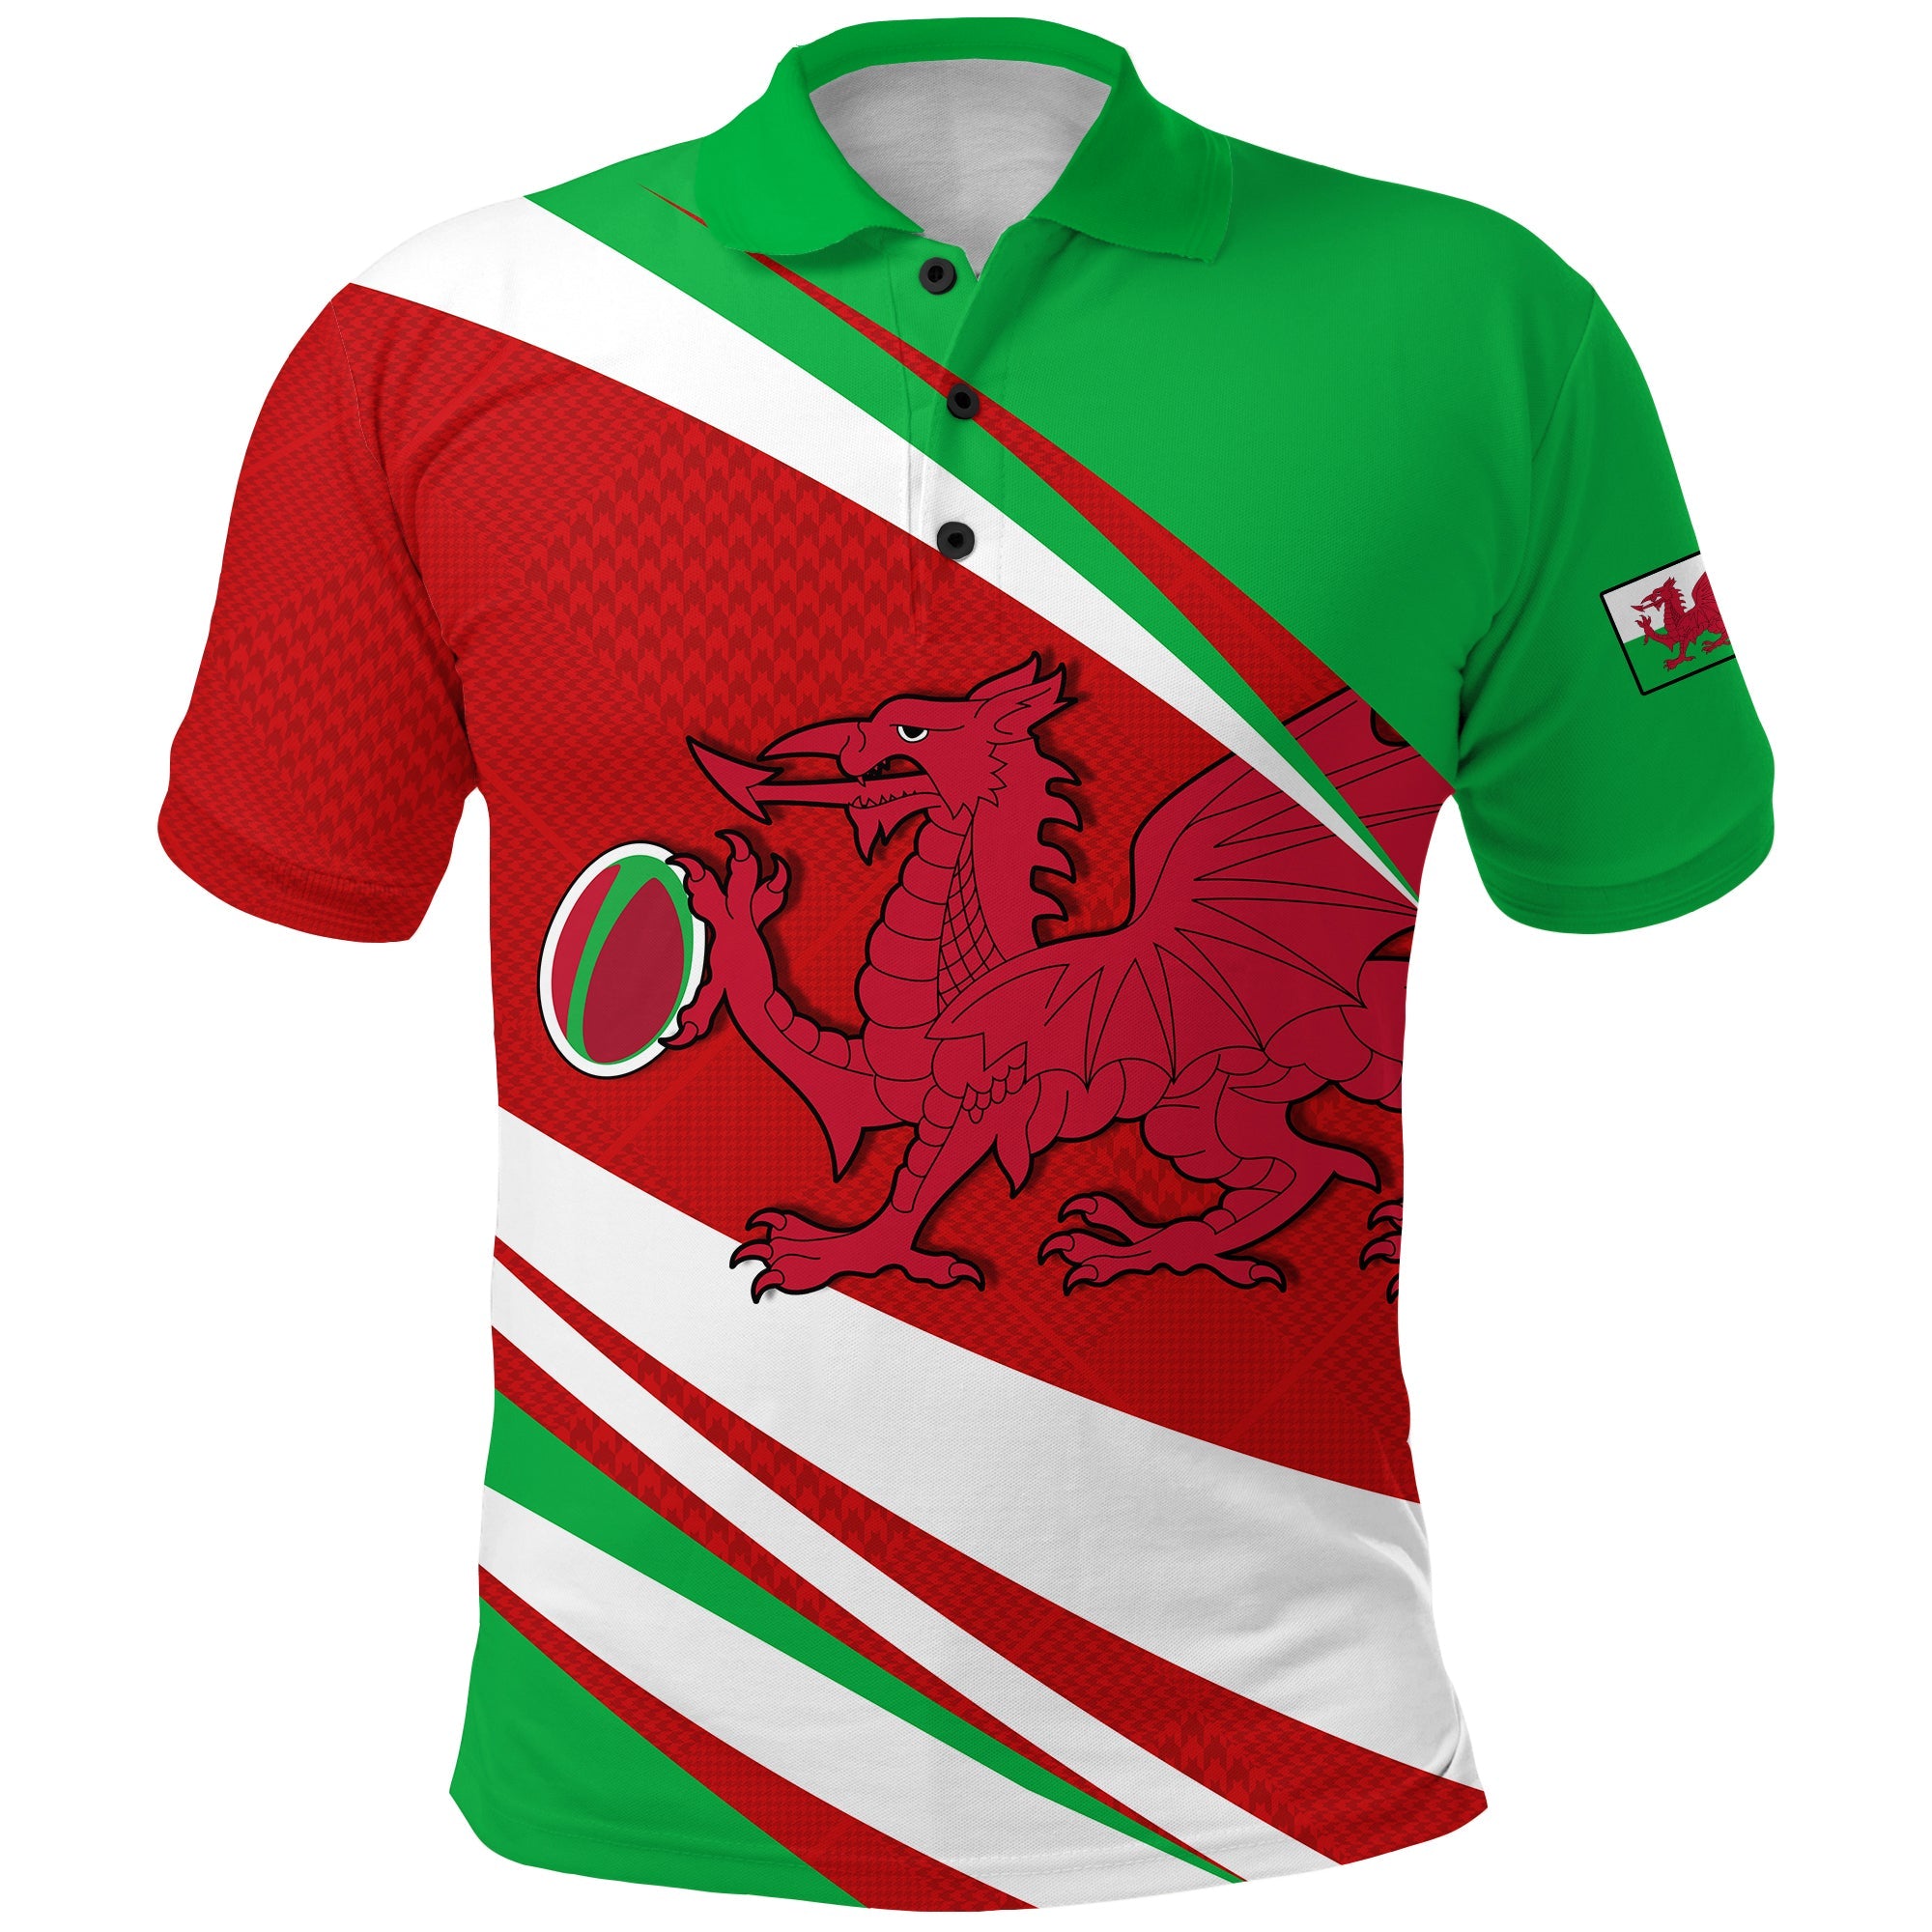 wales-rugby-2021-polo-shirt-mix-pattern-six-nations